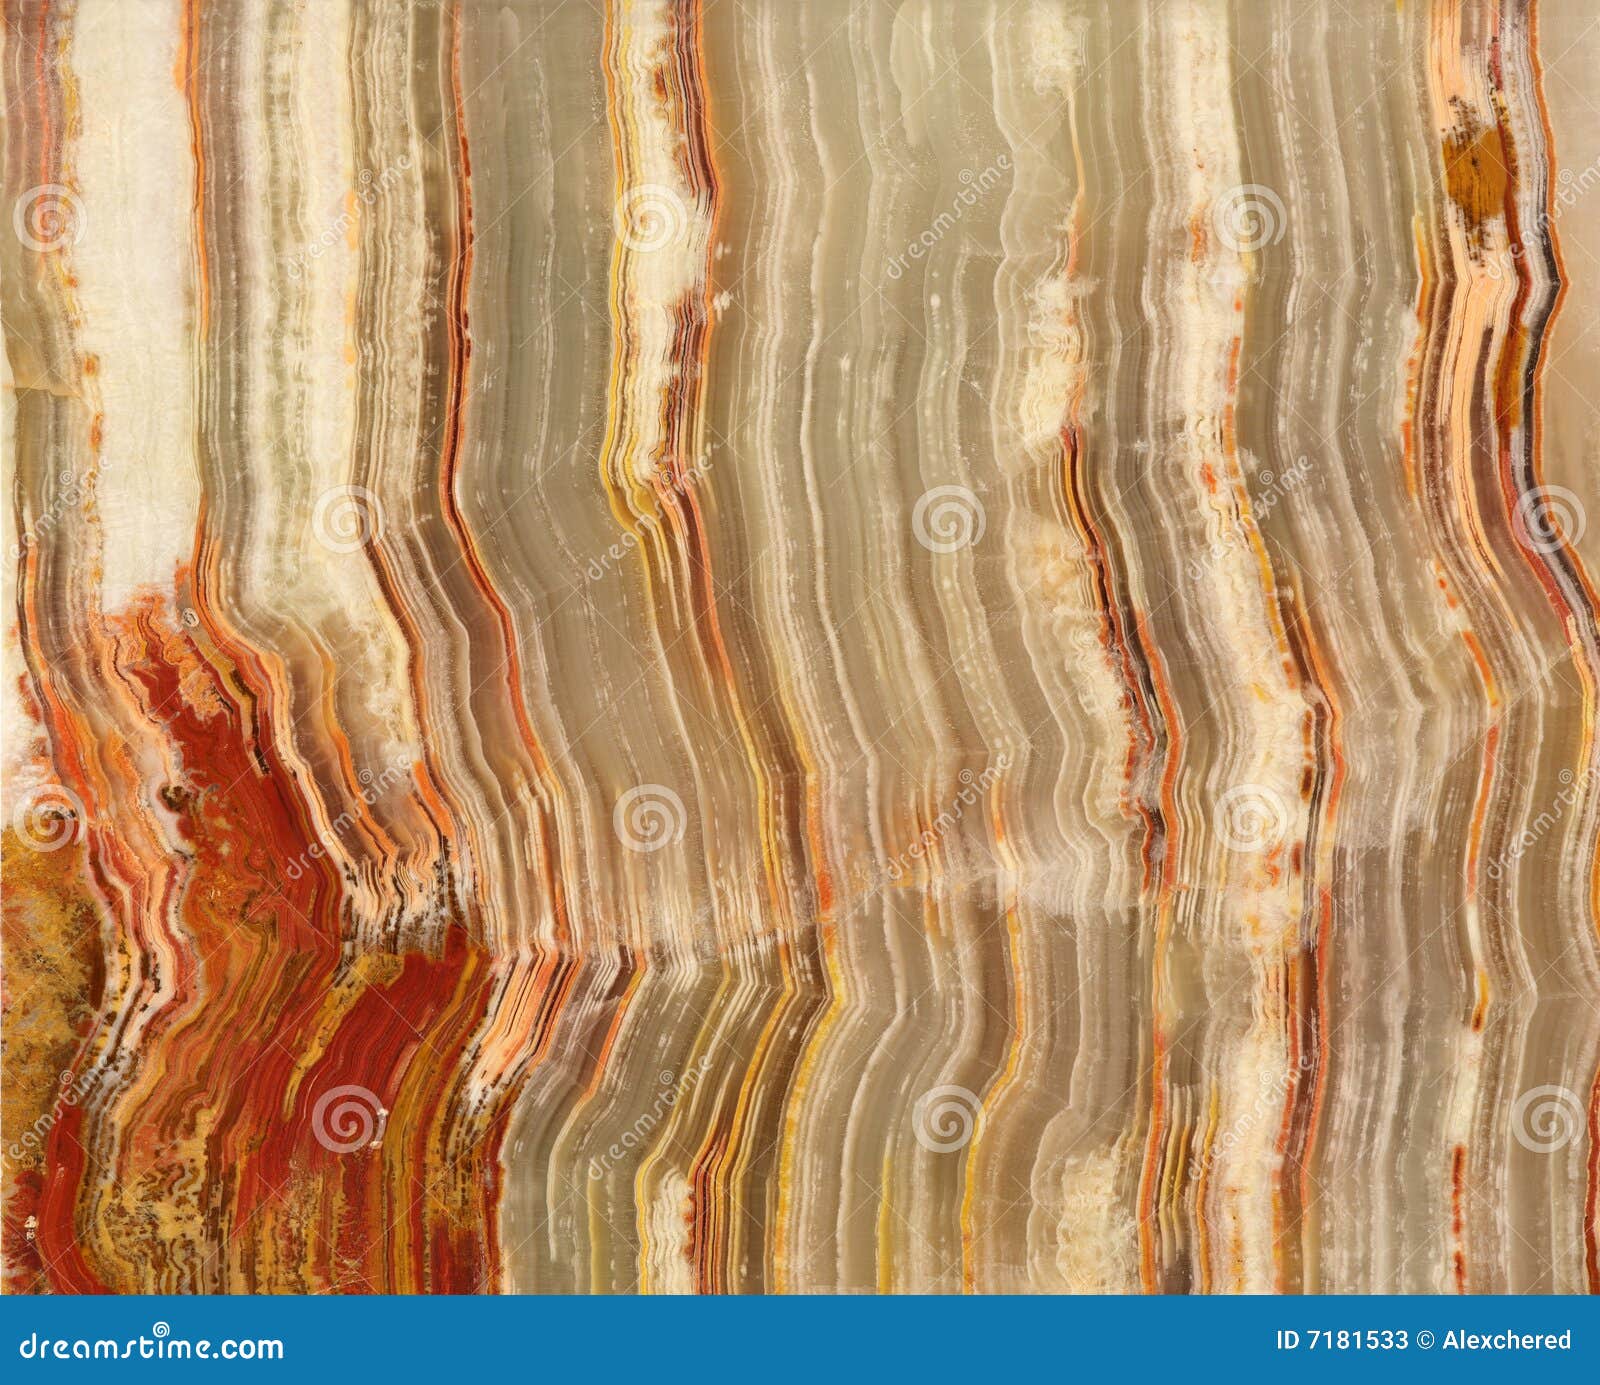 onyx (agate) texture surface background